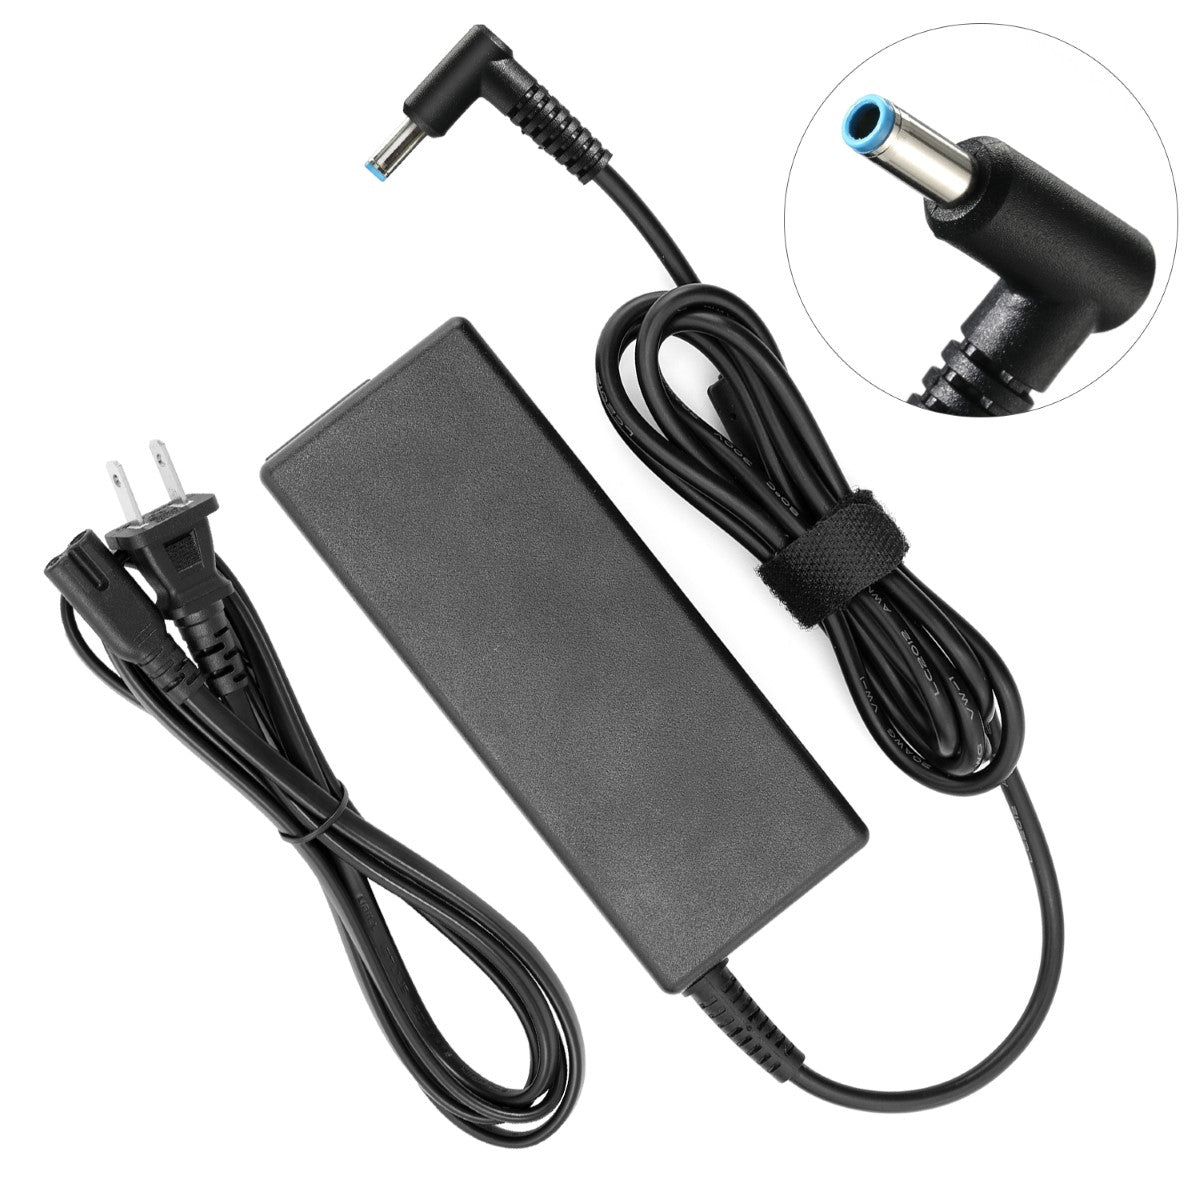 AC Adapter Charger for HP Envy Touchsmart 17-j030us Notebook.